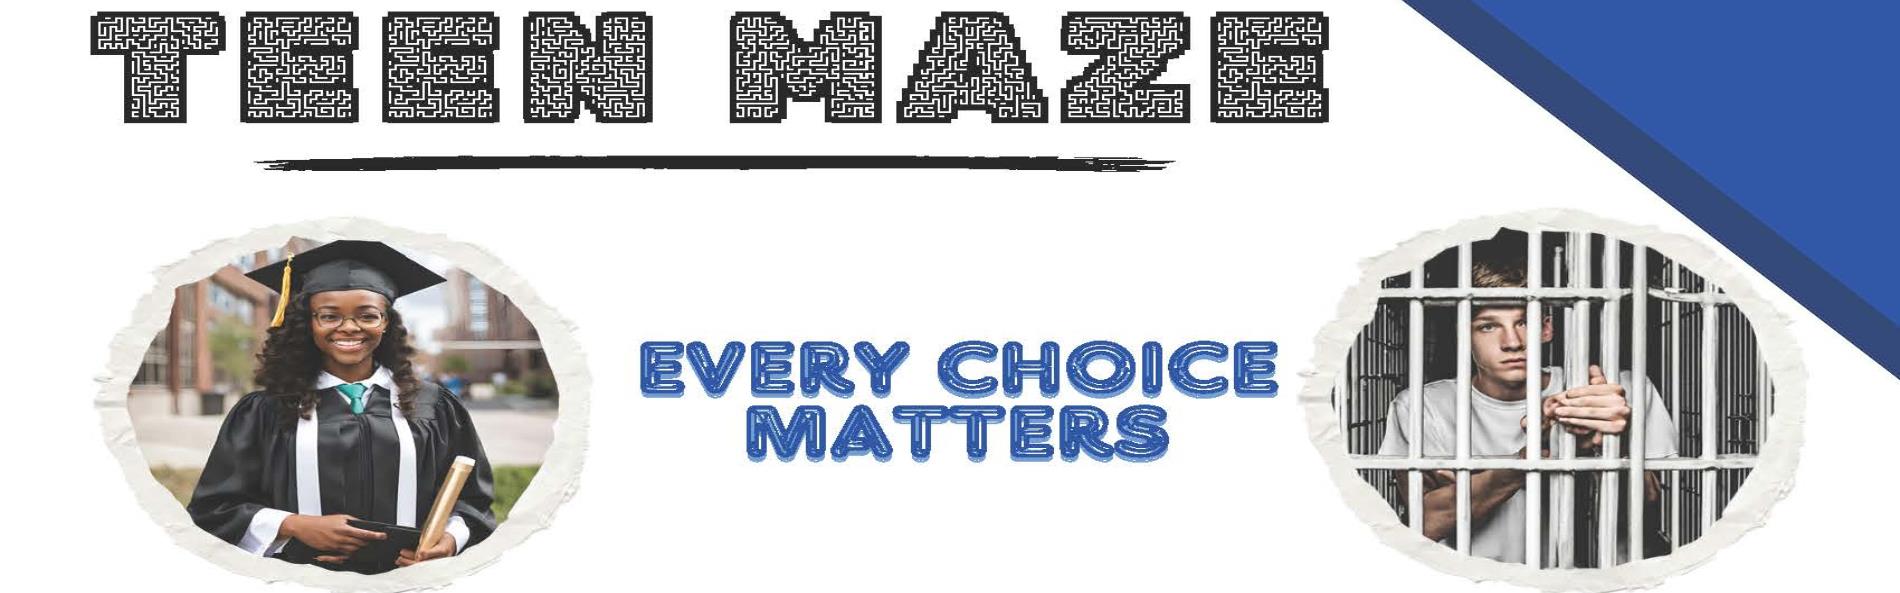 Team Maze Every Choice Possible. Community  Volunteers Needed.